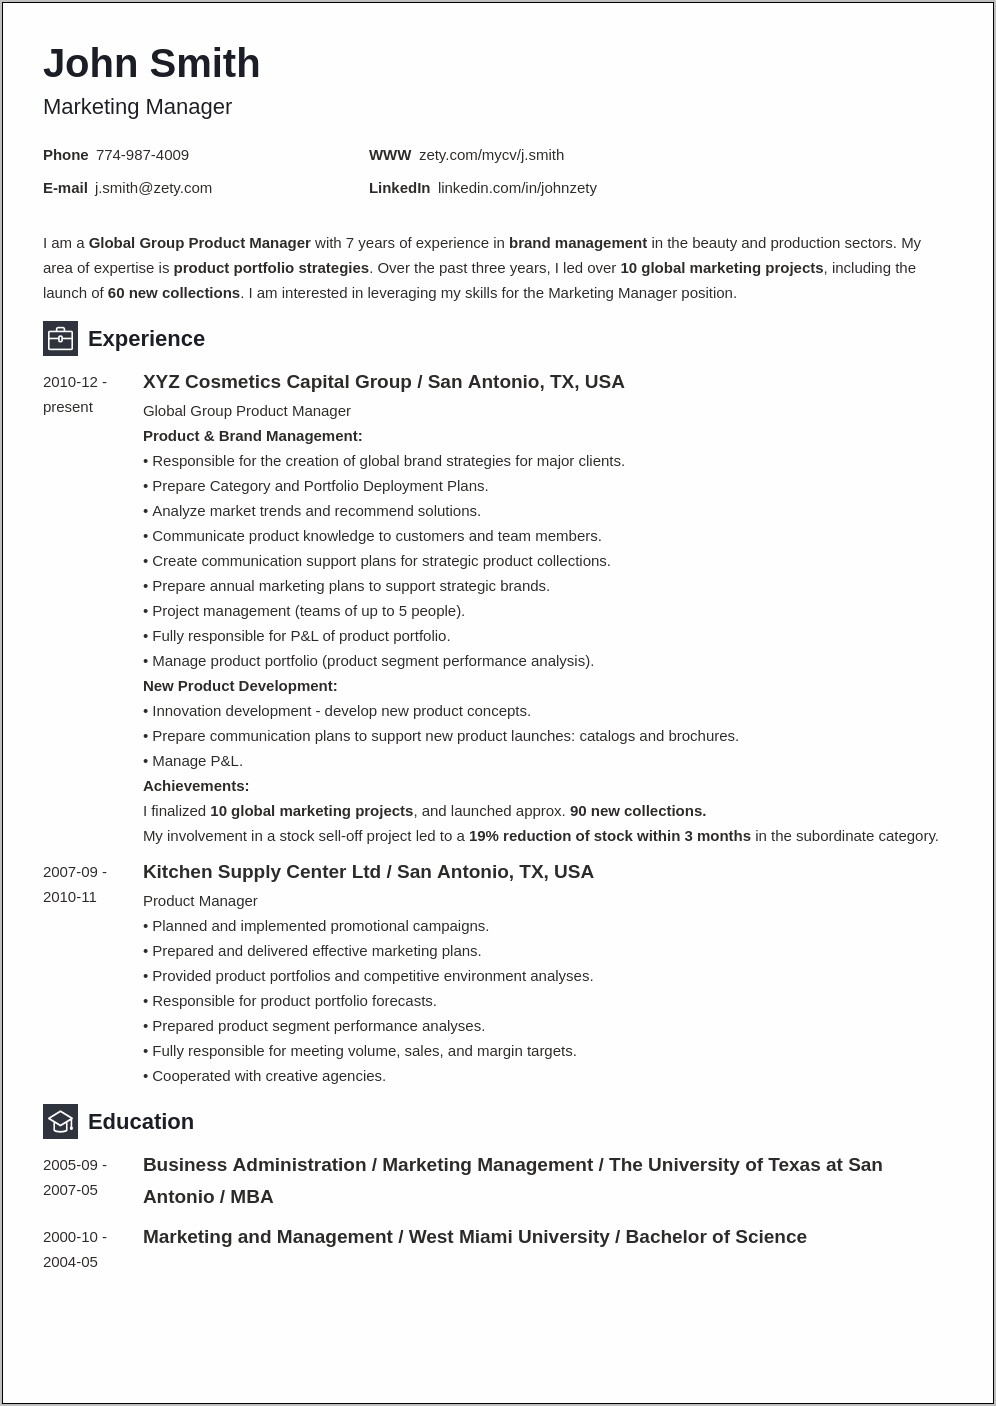 Education Section Of A Resume Example